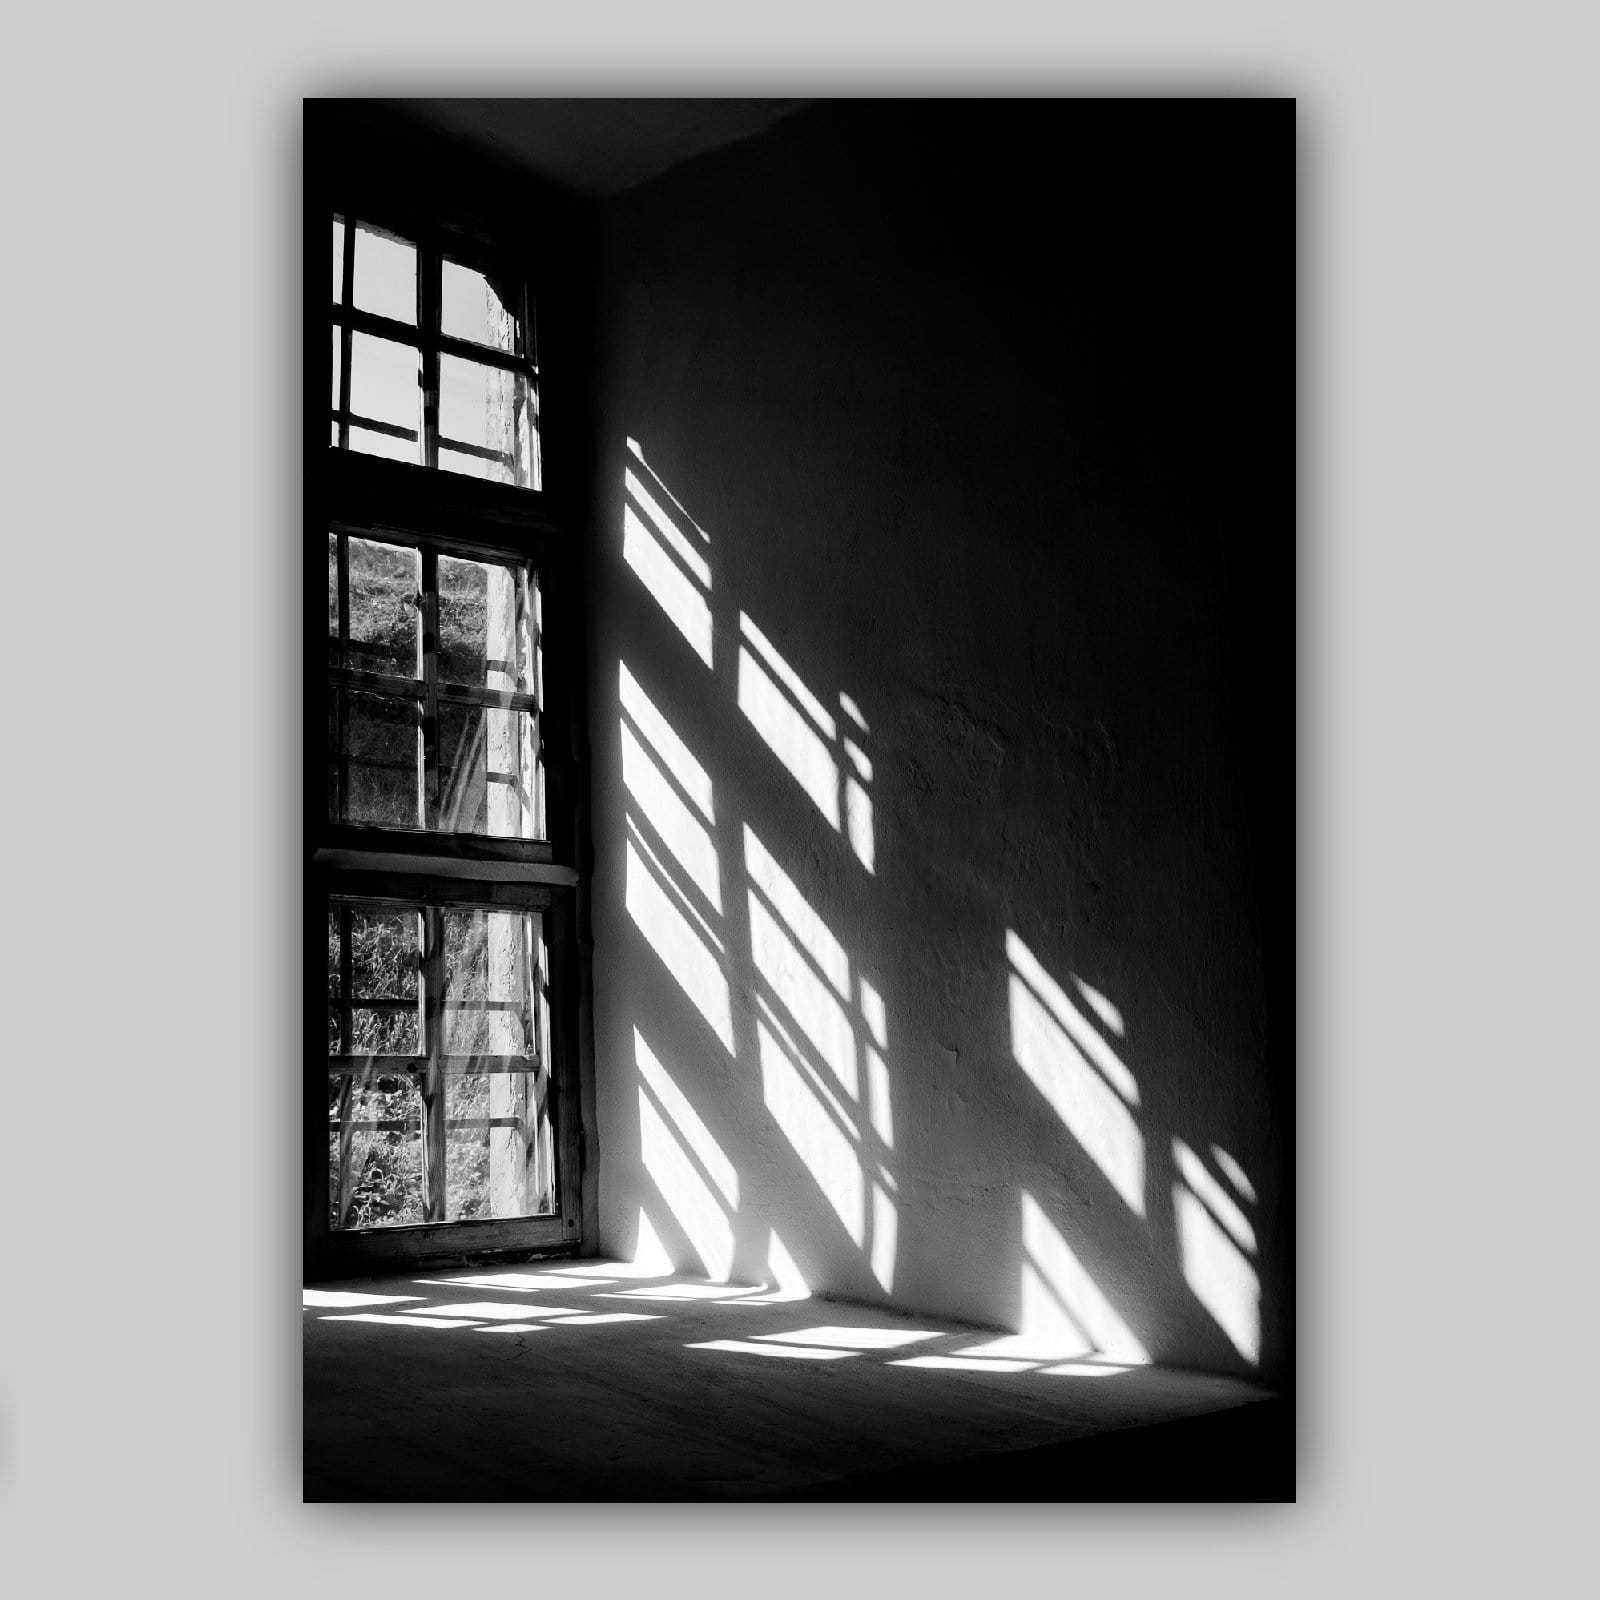 Set of 3 FASHION Woman Angel Wings Window Shadow Monochrome Black and White Photograph Gallery Wall Art Print Picture Poster